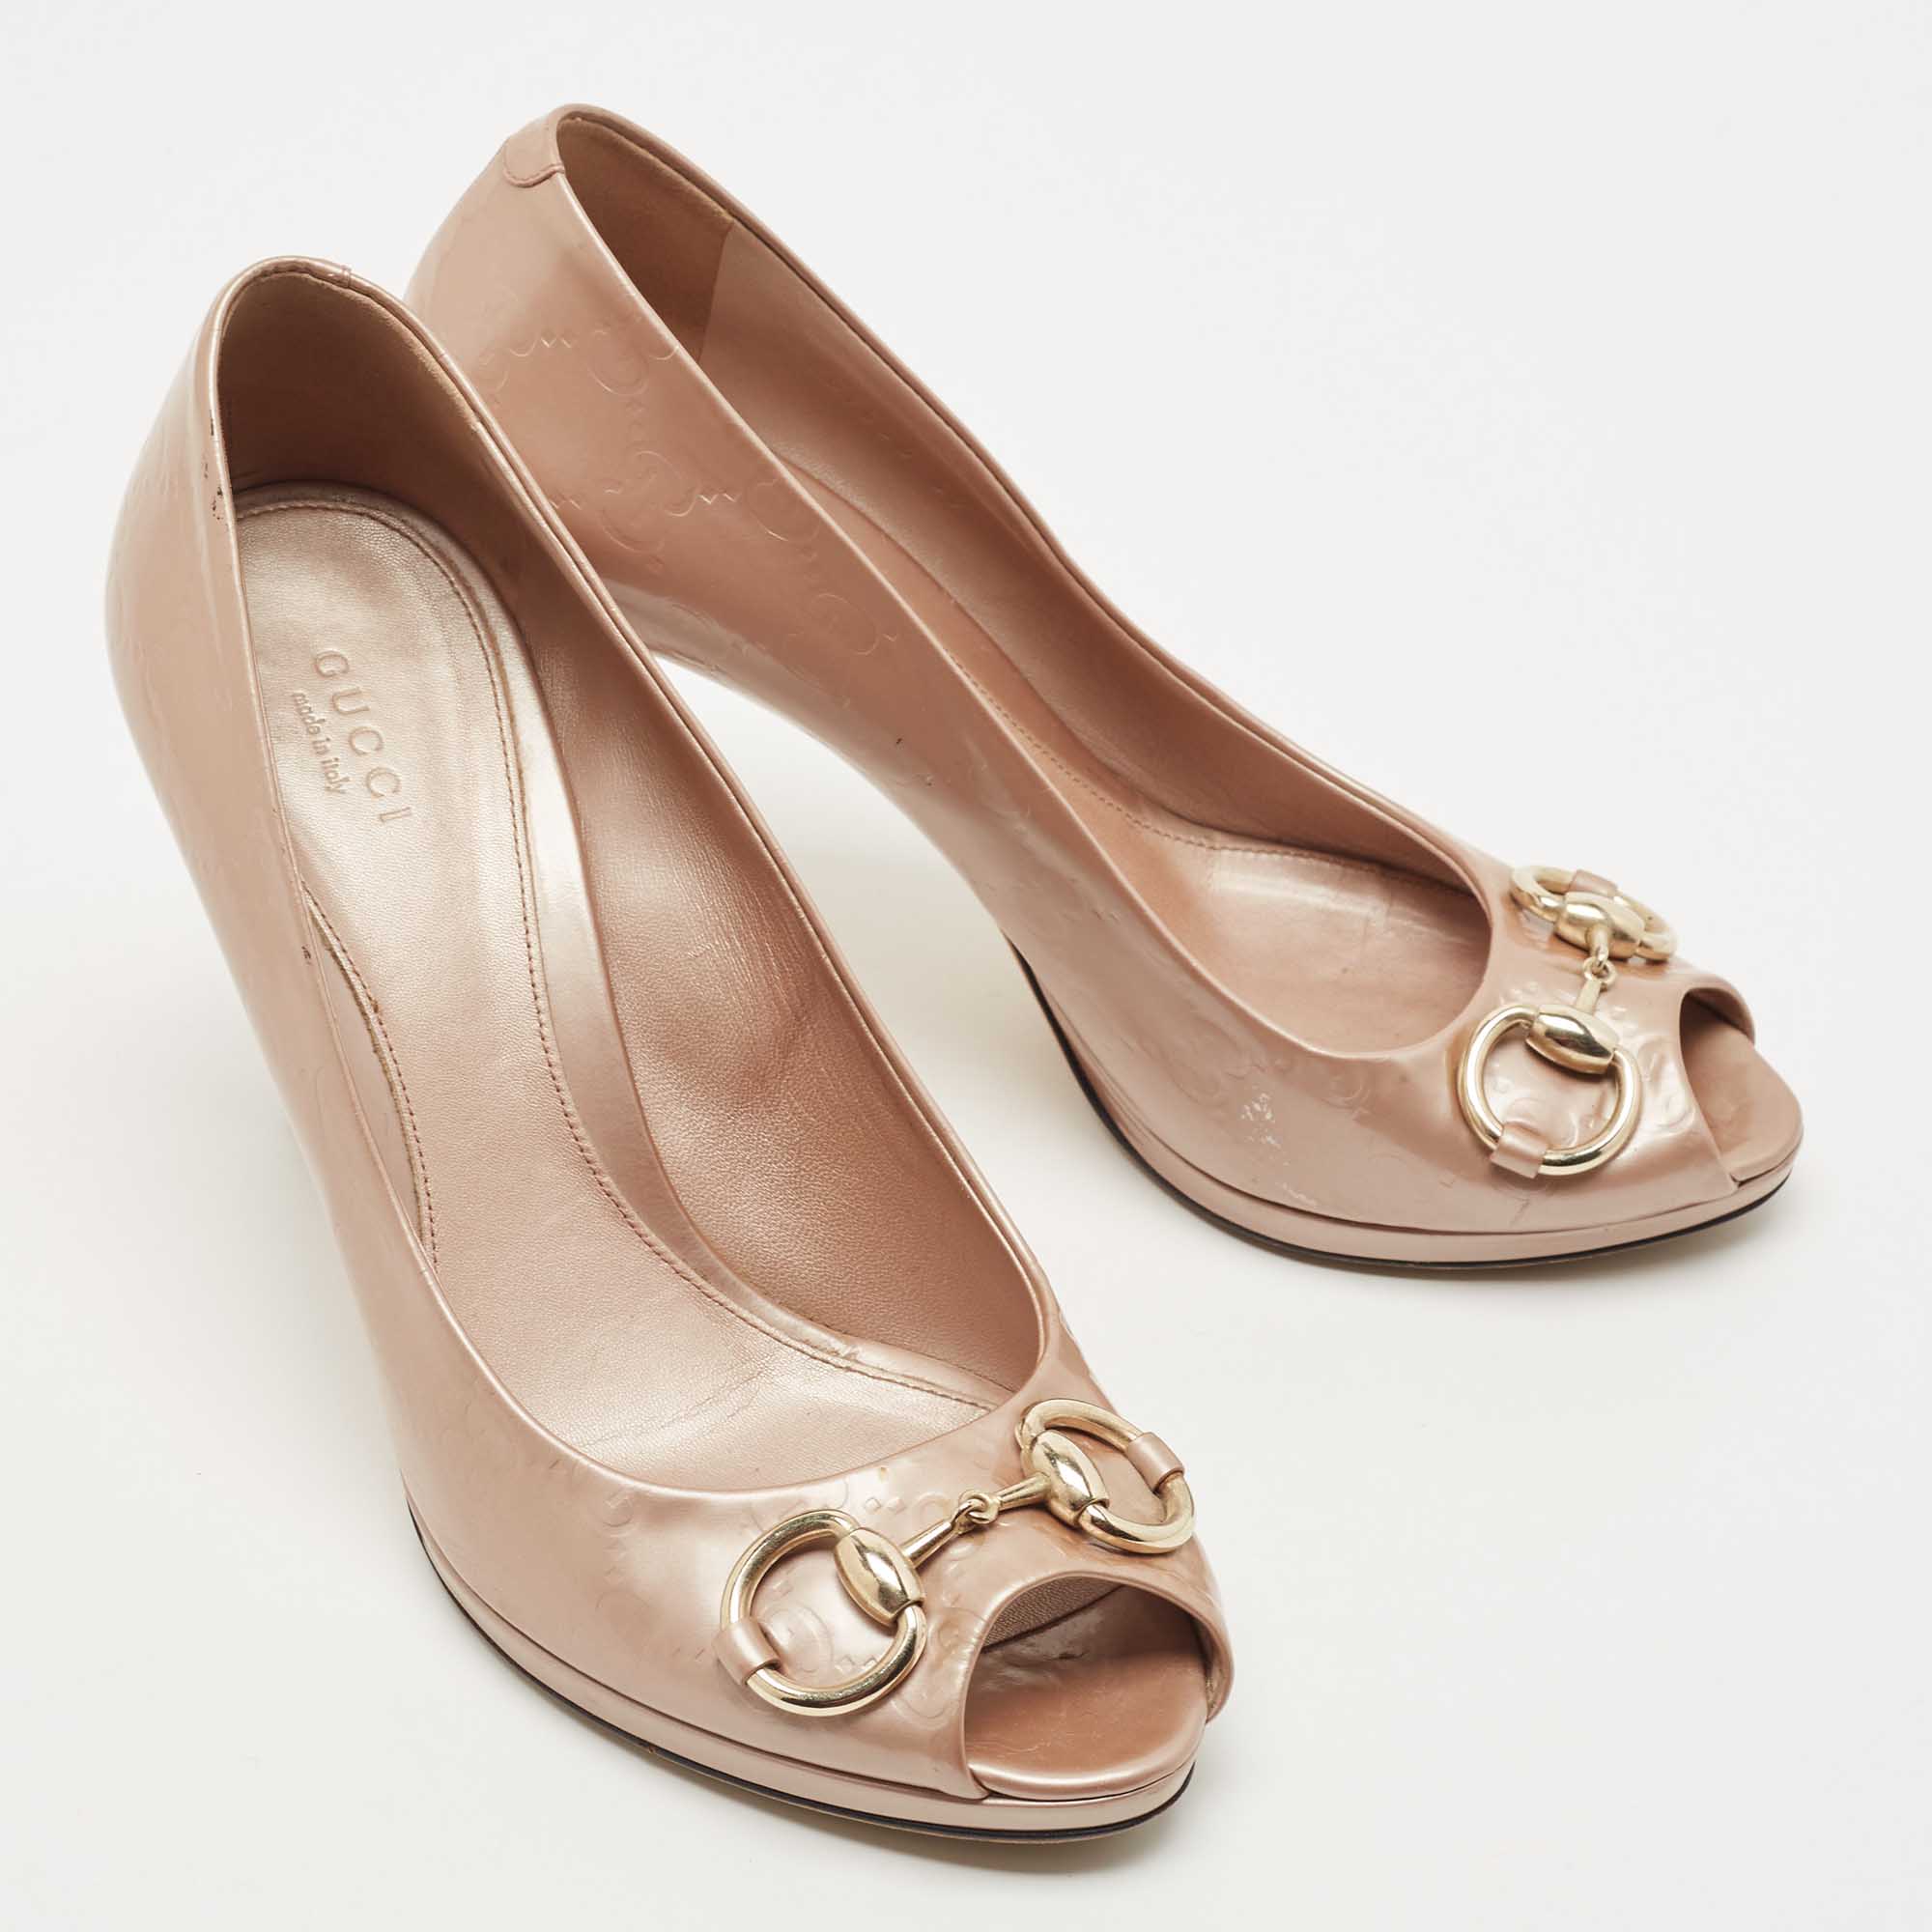 Gucci Beige Guccissima Patent Leather New Hollywood Horsebit Peep Toe Pumps Size 39